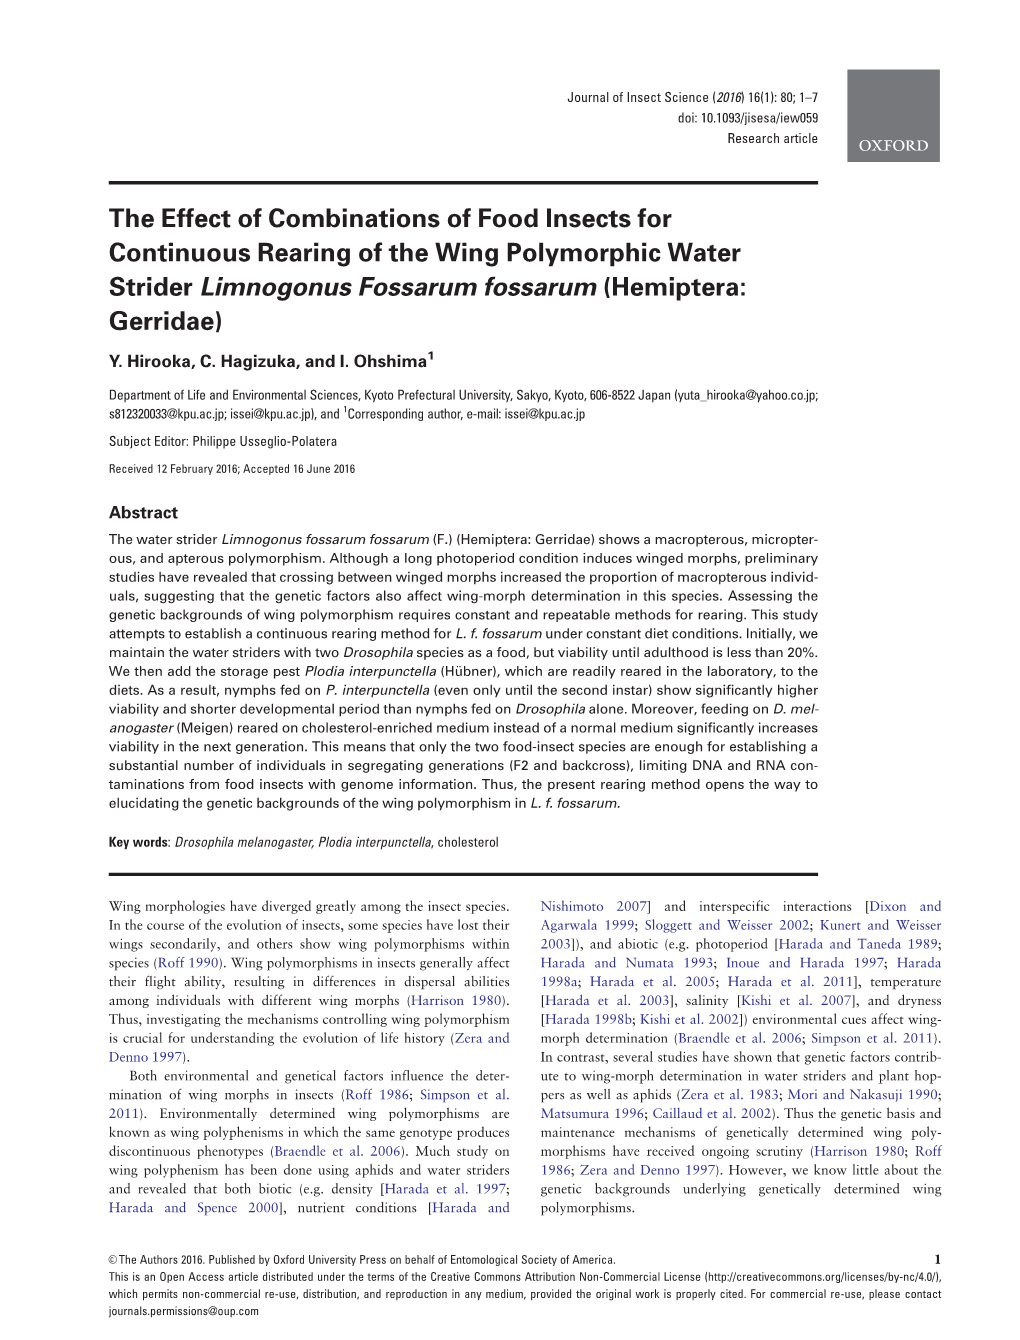 The Effect of Combinations of Food Insects for Continuous Rearing of the Wing Polymorphic Water Strider Limnogonus Fossarum Fossarum (Hemiptera: Gerridae)